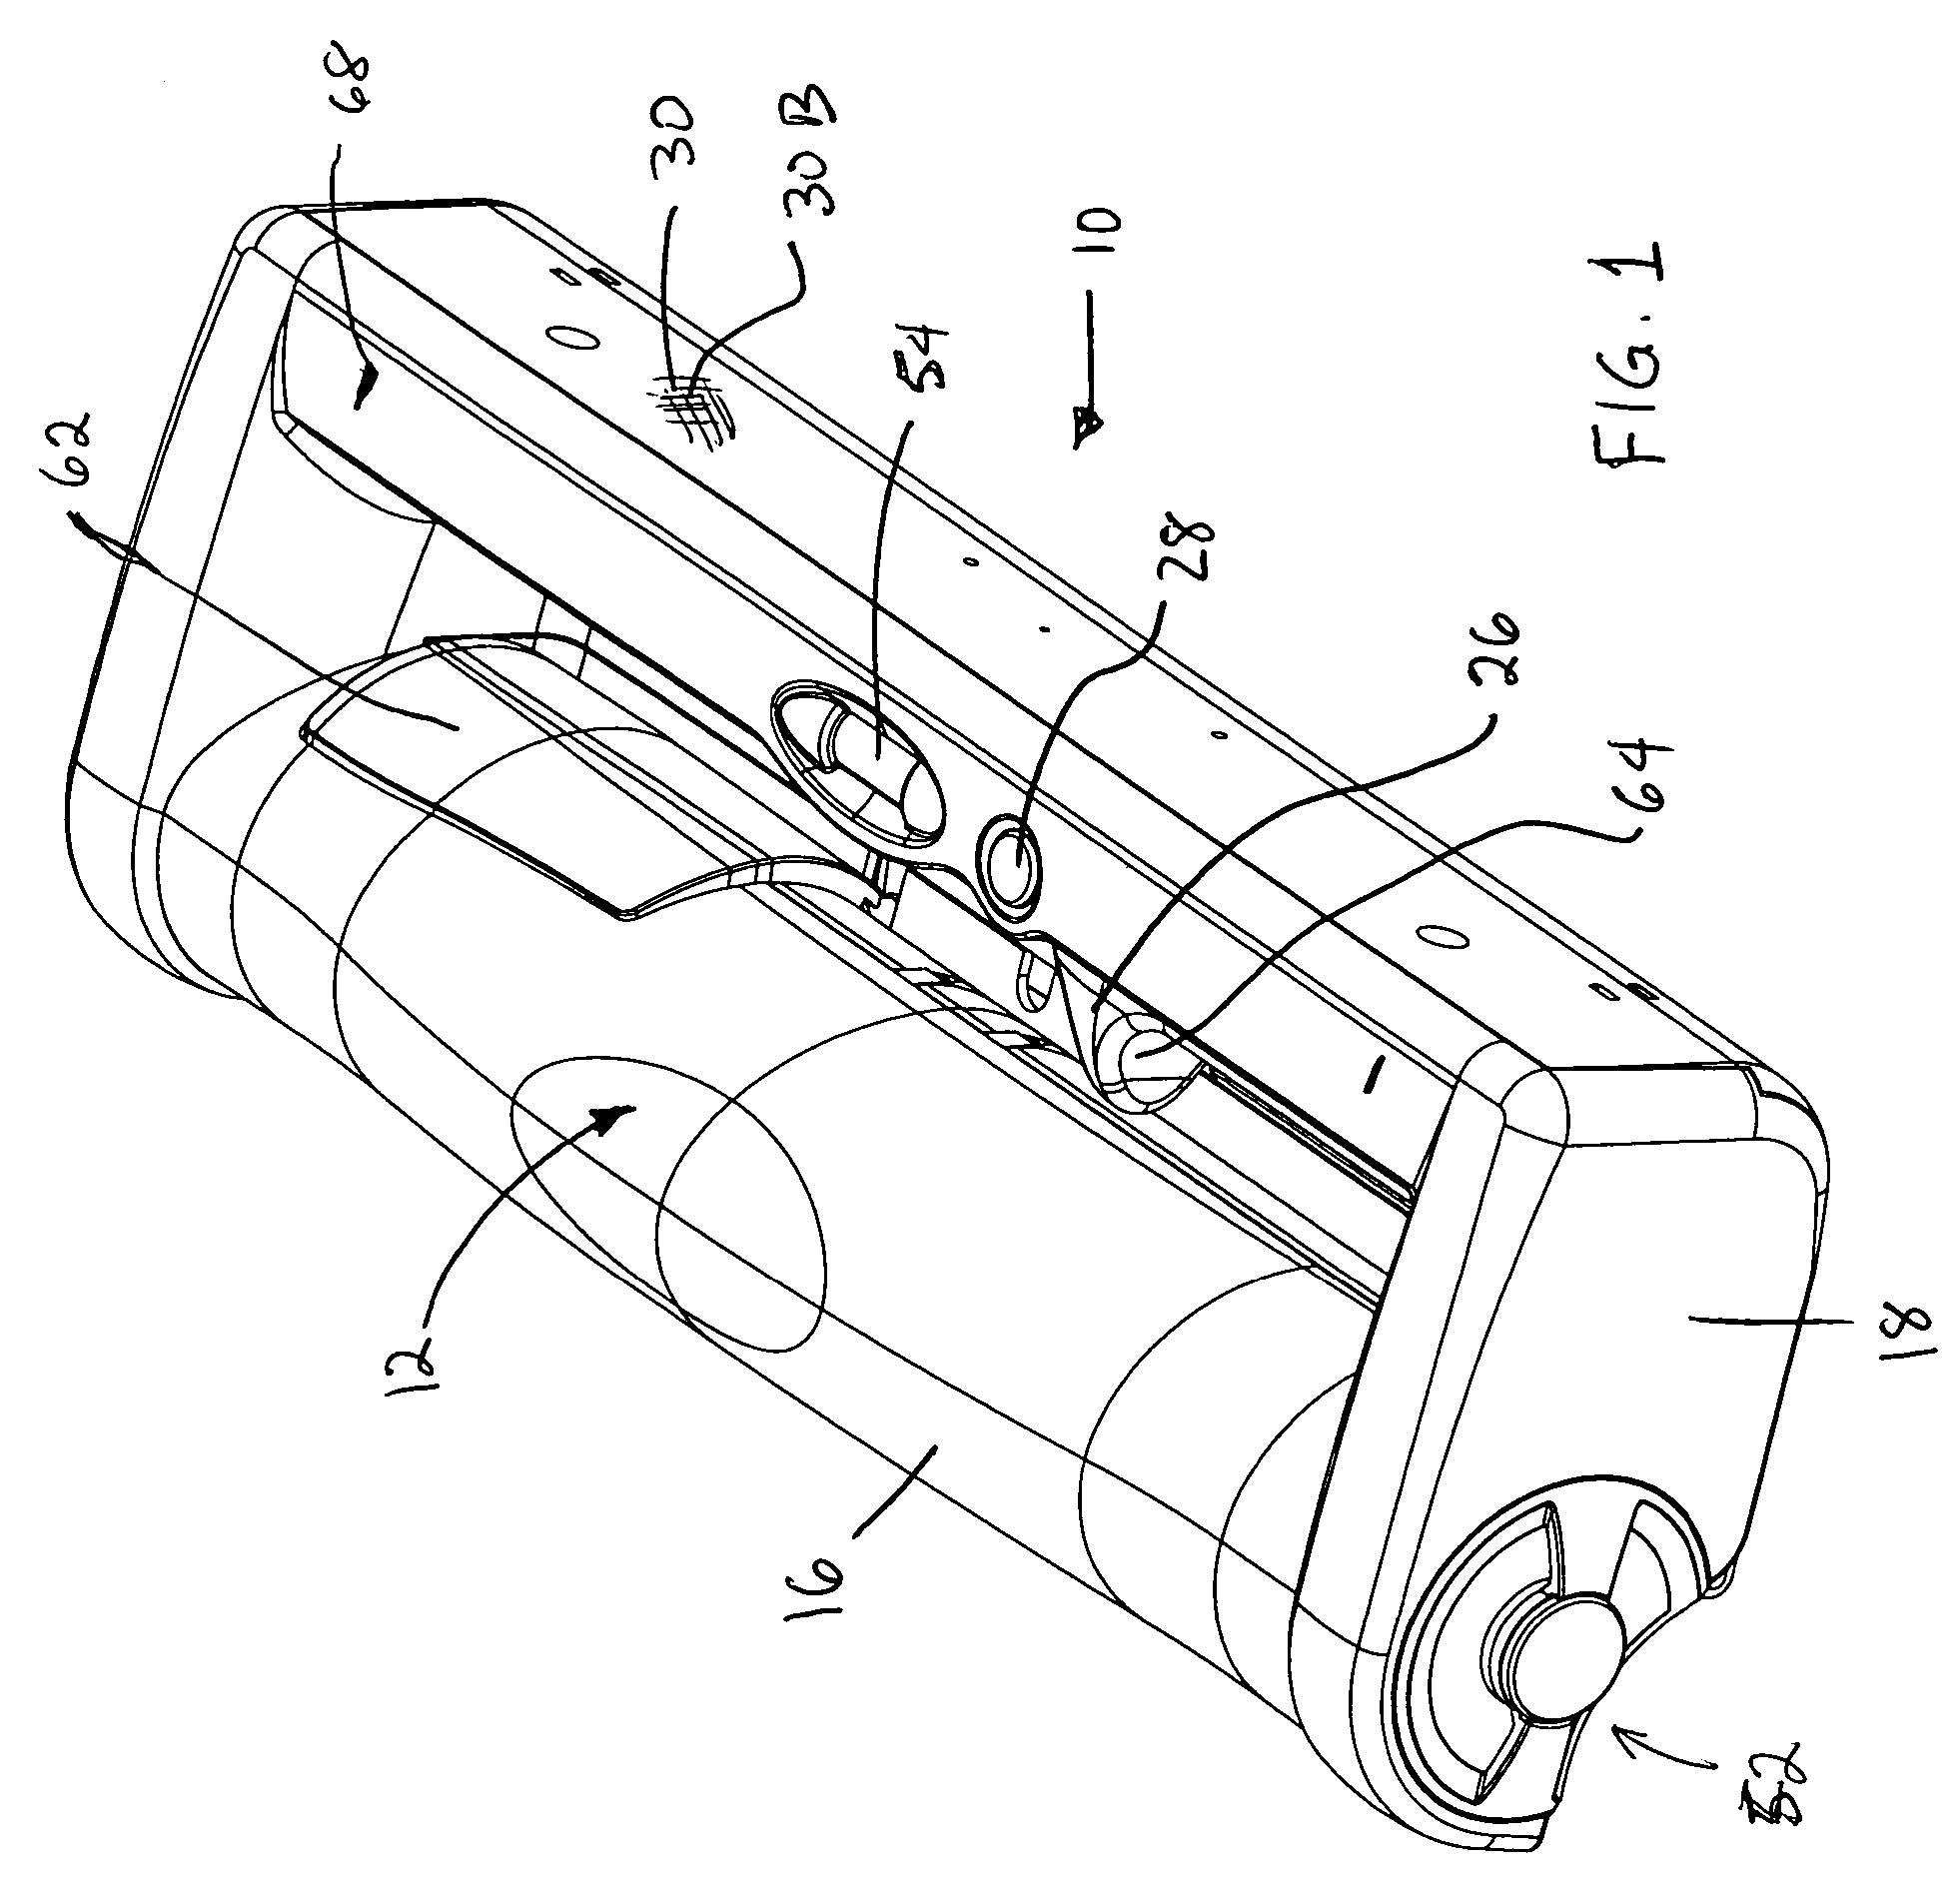 Applicator for and method of applying a sheet material to a substrate